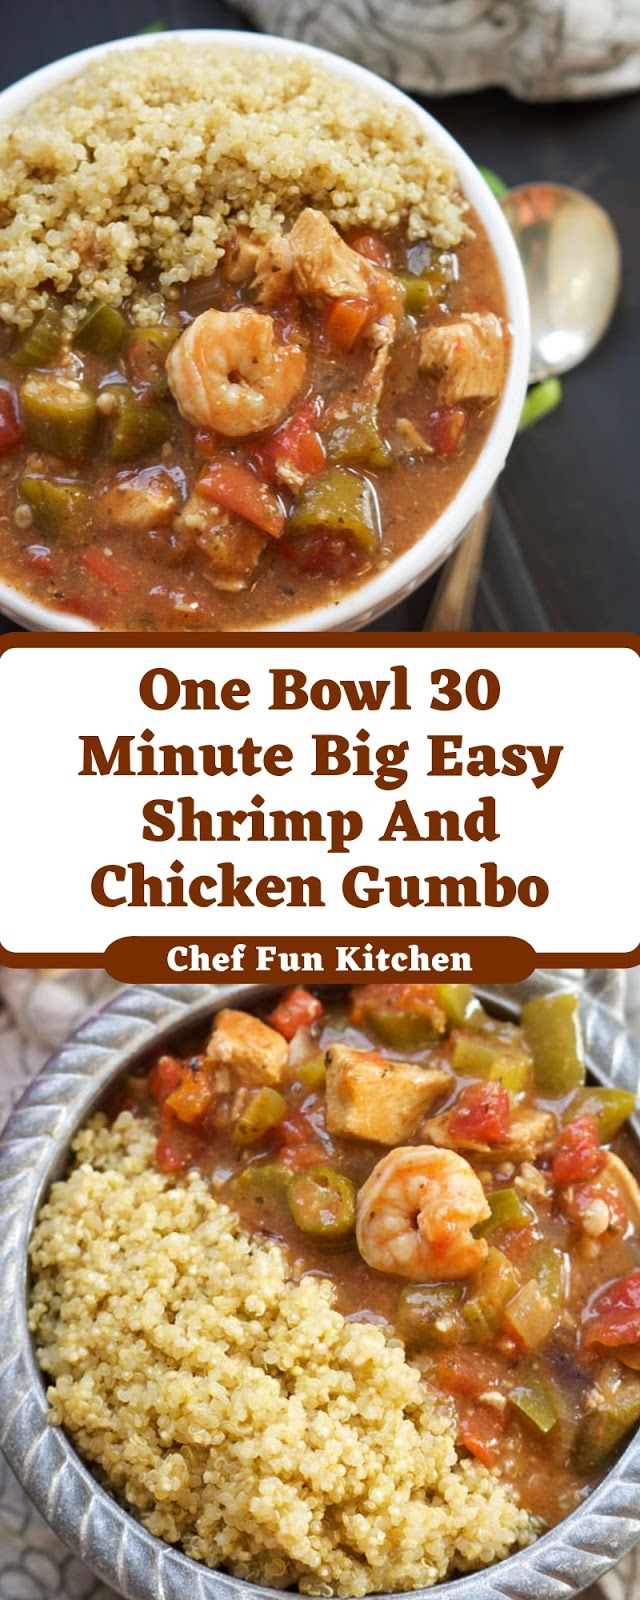 One Bowl 30 Minute Big Easy Shrimp And Chicken Gumbo